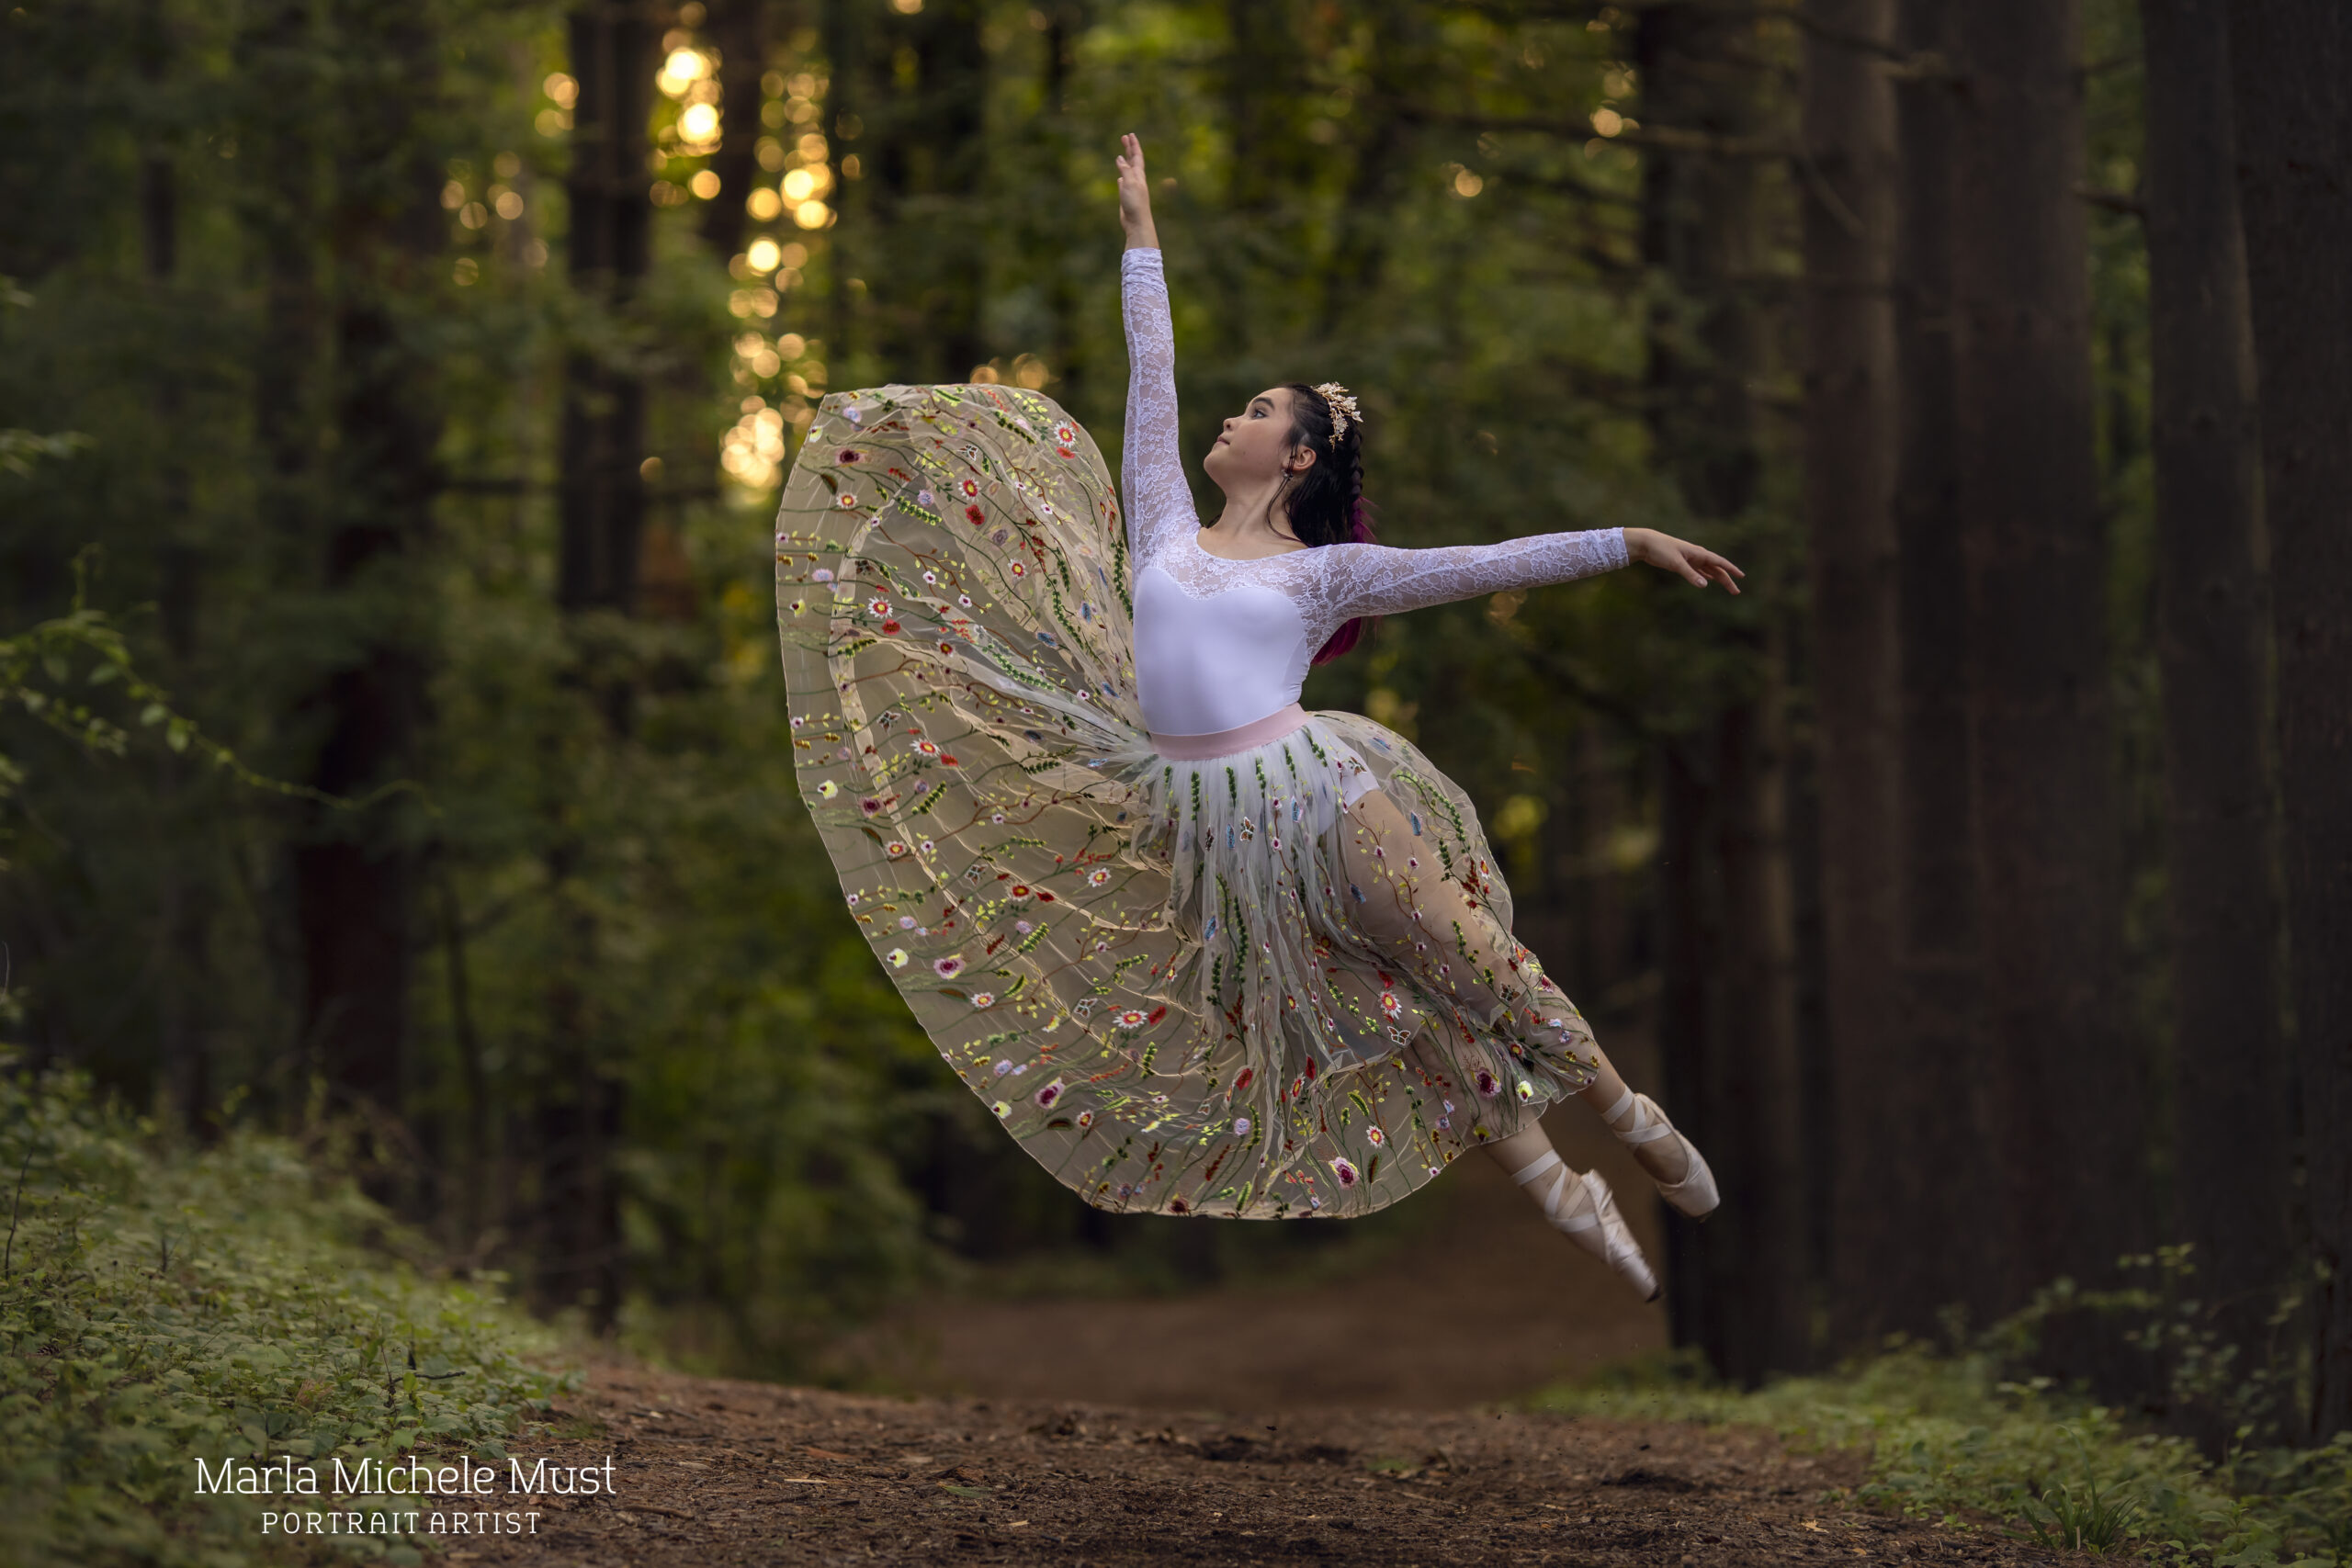 Dancer tosses her skirt in the air and jumps during a dance photoshoot, taken by a Michigan dance photographer.